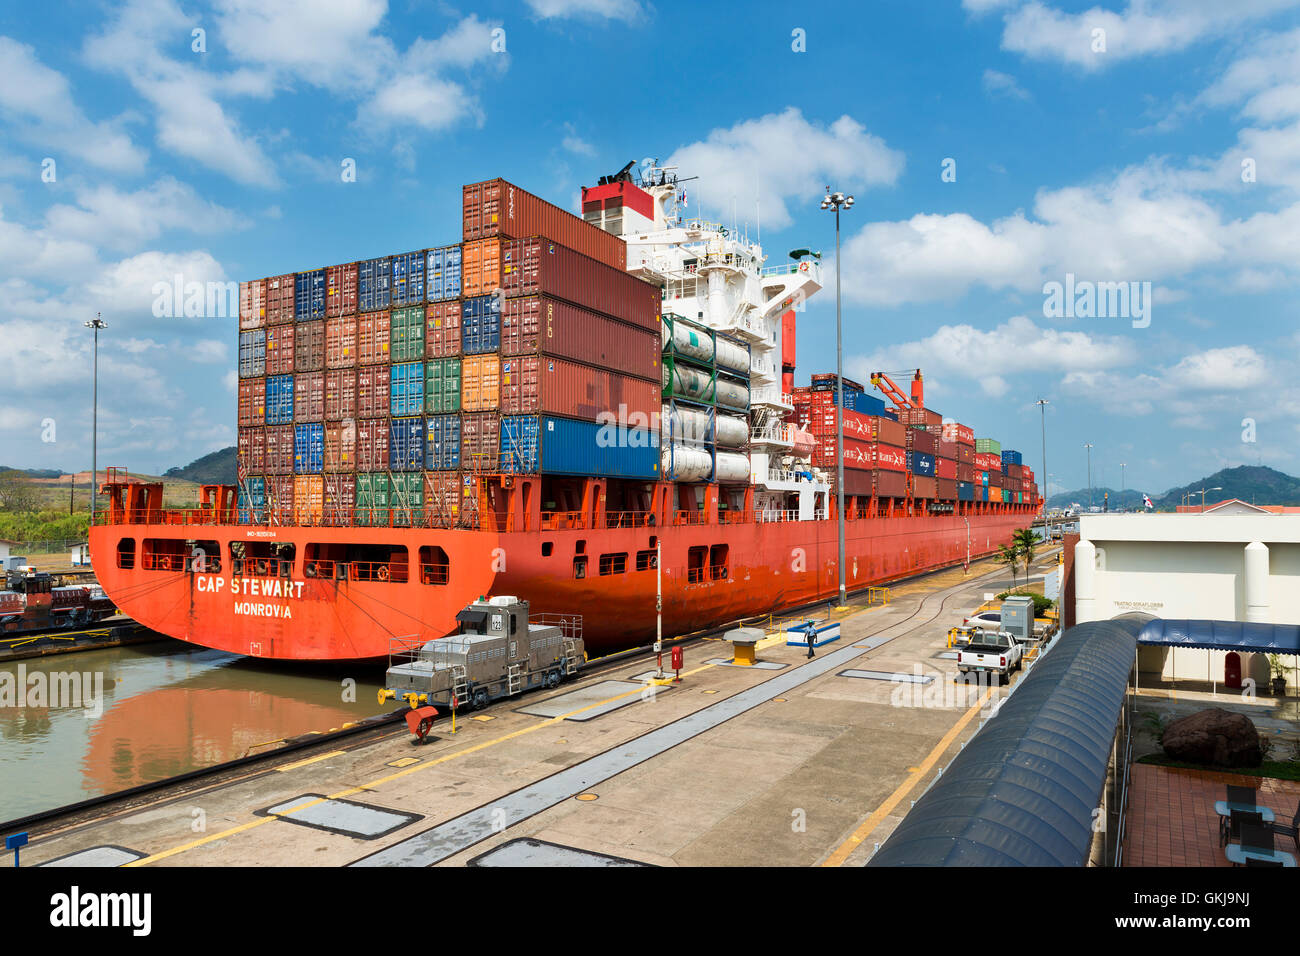 Panama Canal, Panama - March 17, 2014: A cargo ship in the Miraflores Locks in the Panama Canal, in Panama Stock Photo